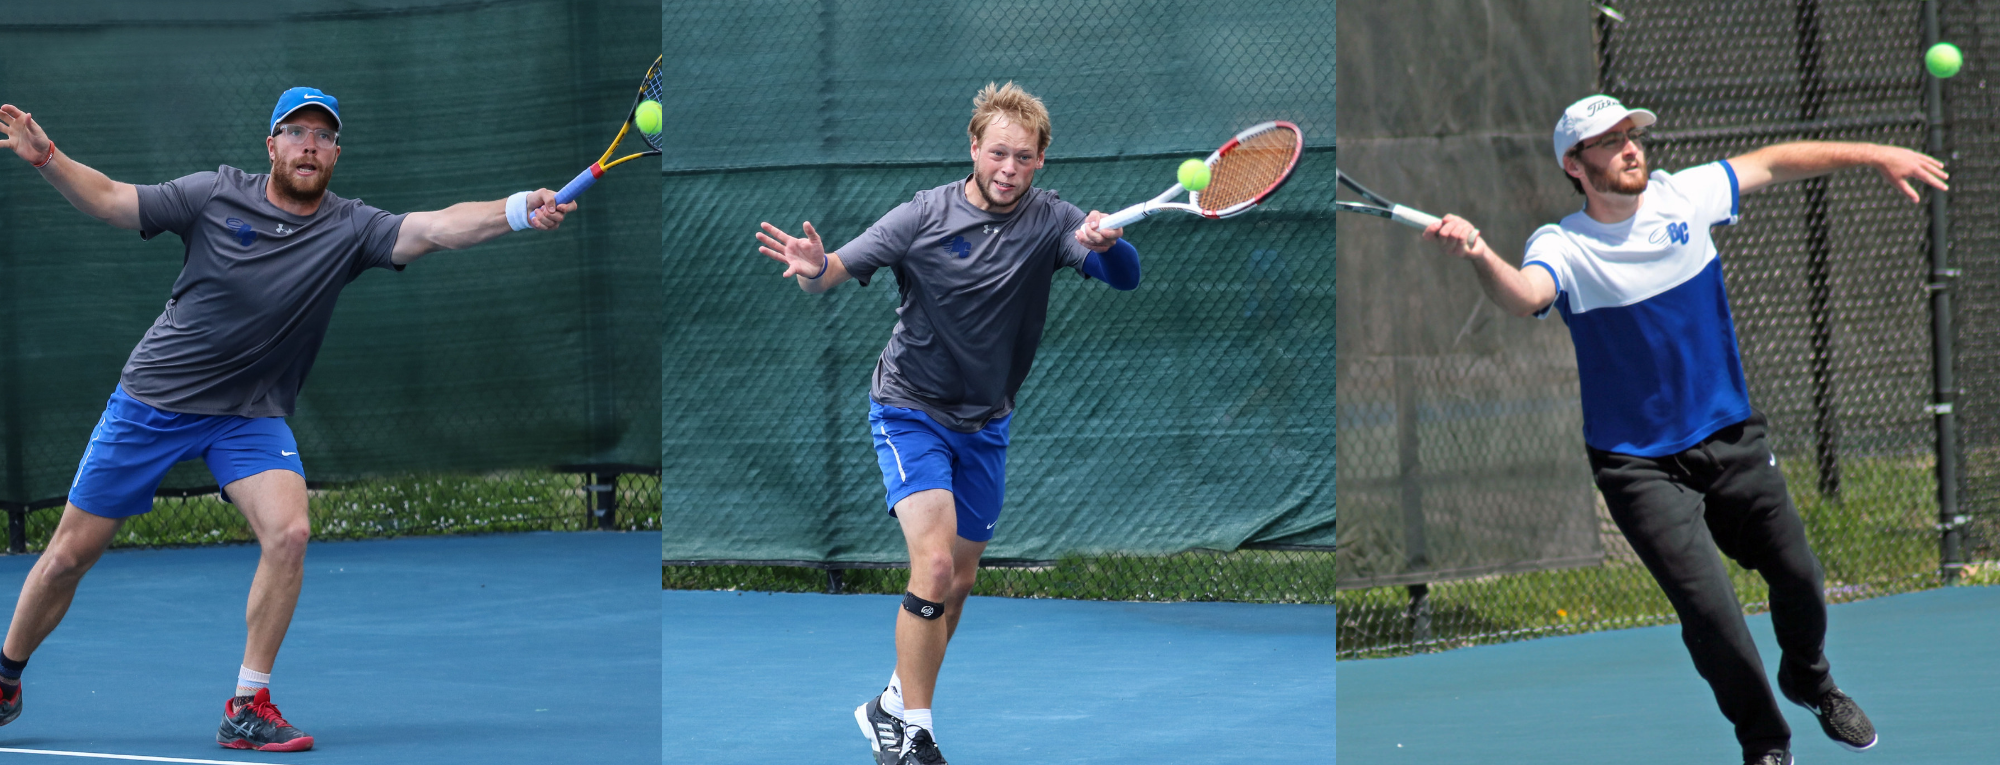 Mittring and Hengst Win Singles and Doubles Matches on Senior Day